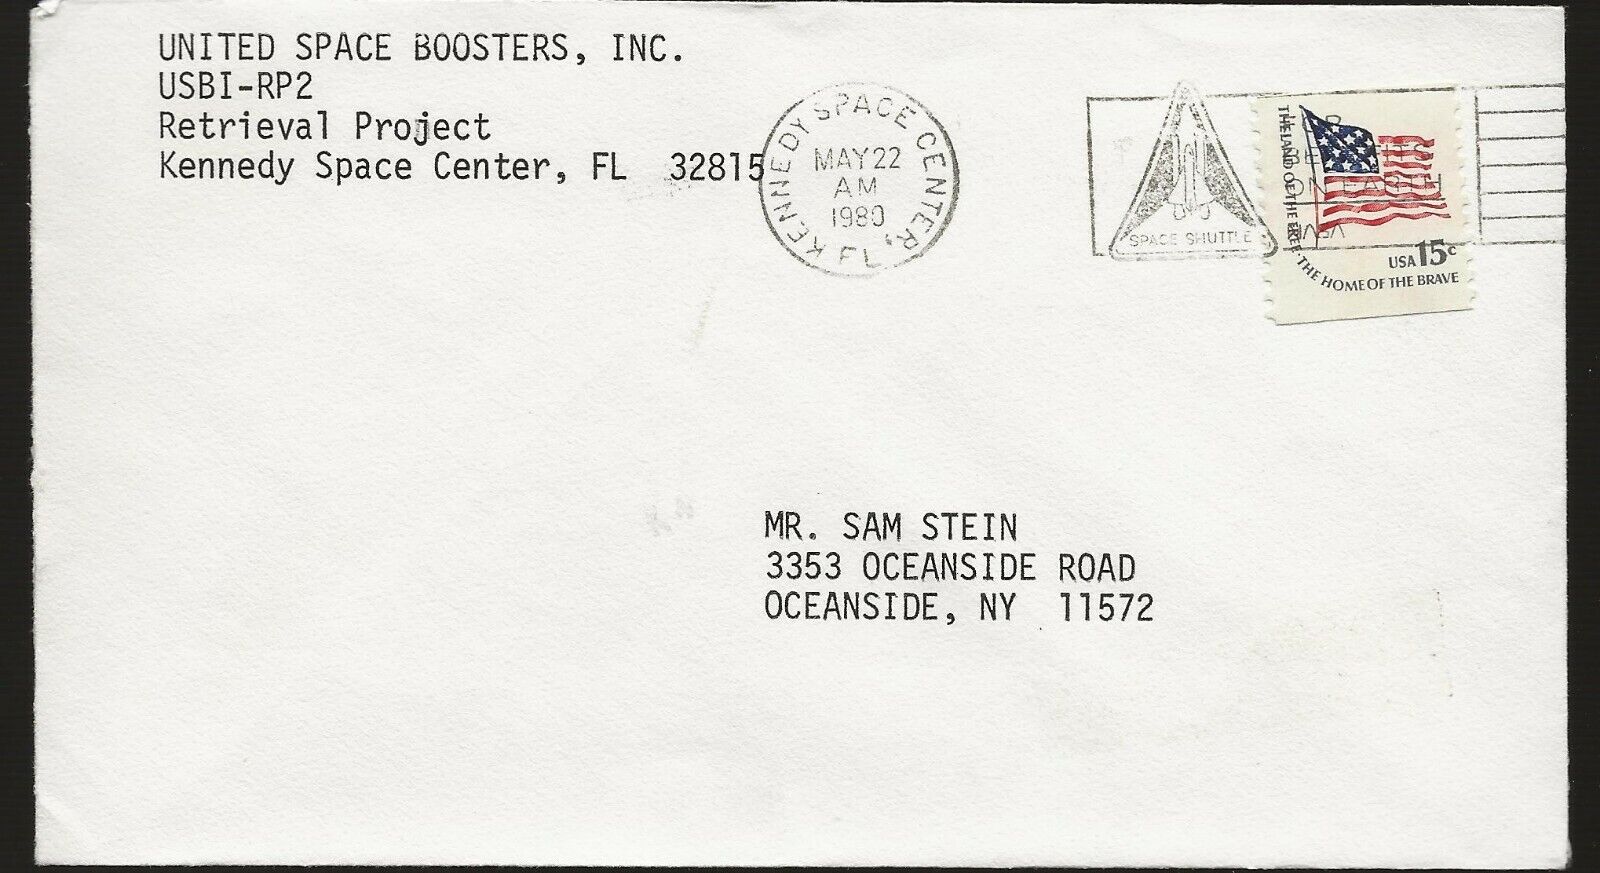 1980 Ksc United Space Boosters Inc, Booster Retrieval